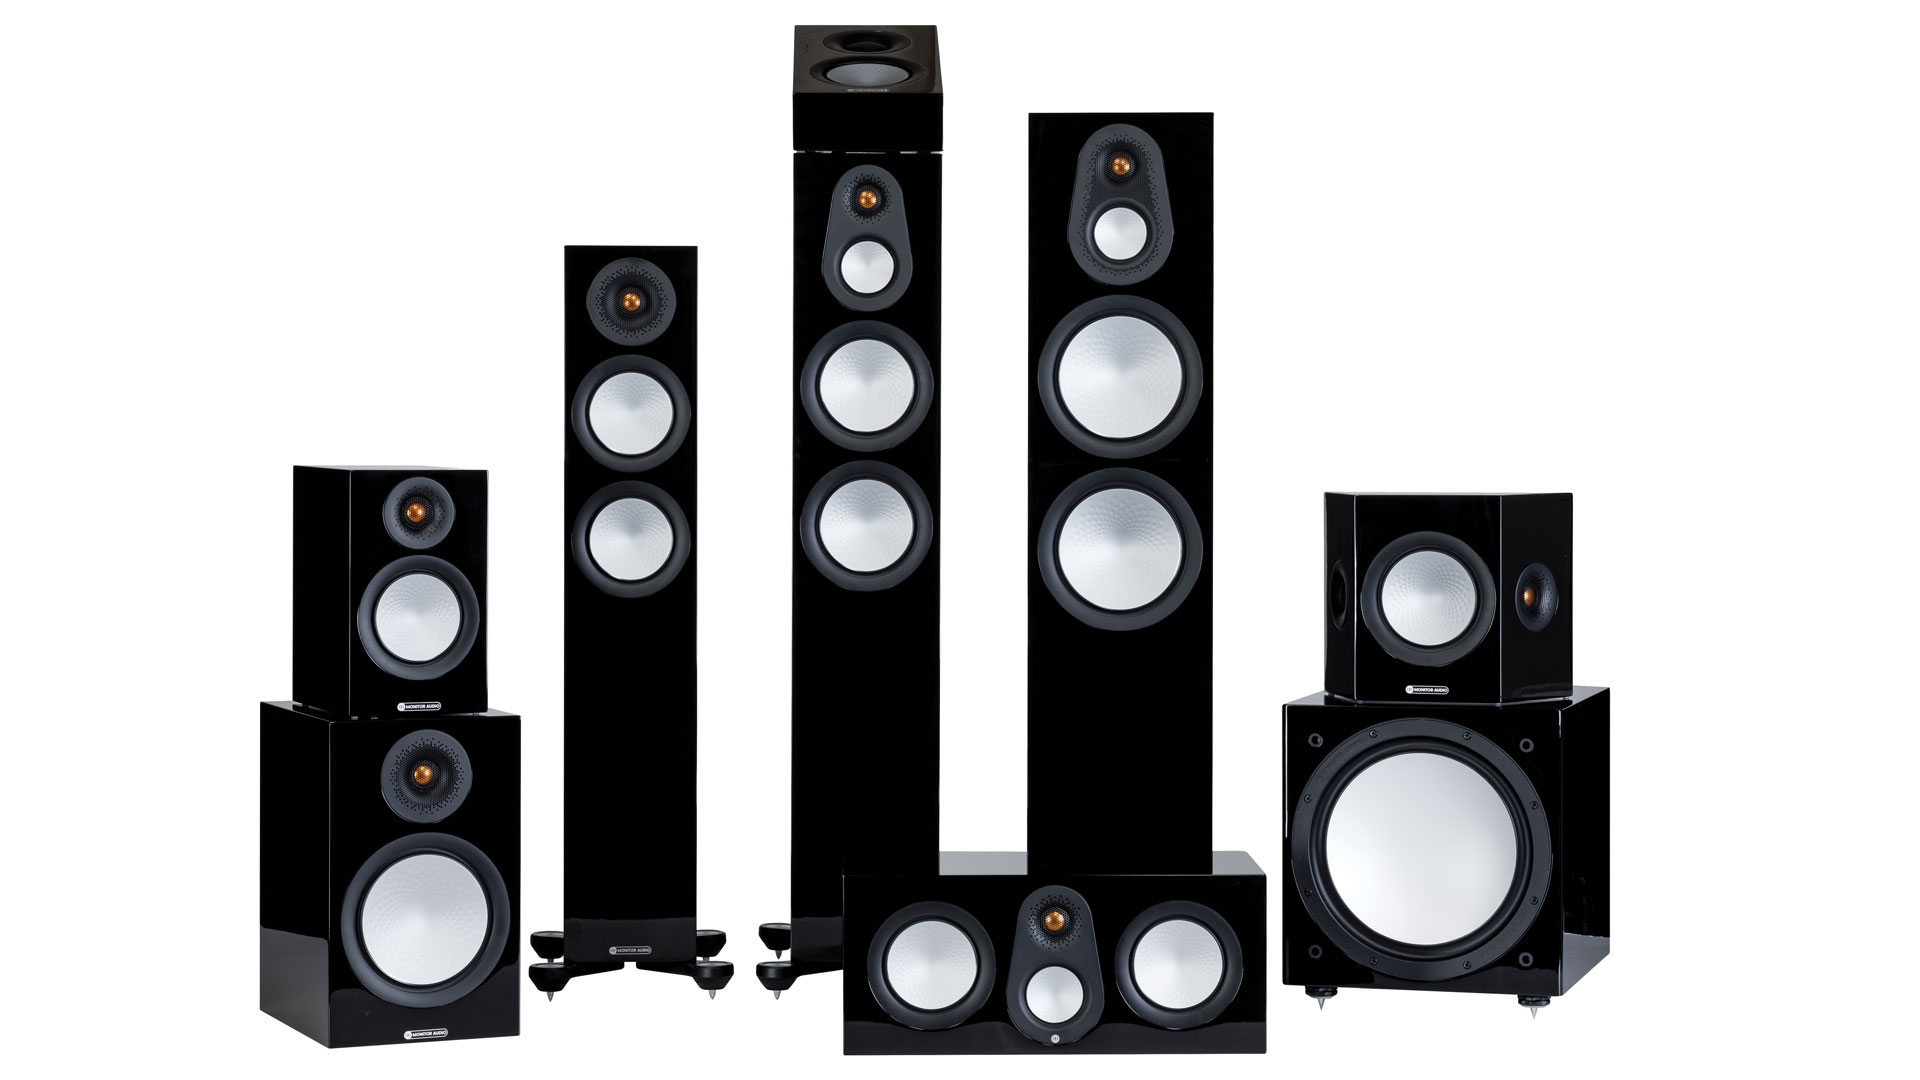 The complete new Silver 7G Series from Monitor Audio (Image Credit: Monitor Audio)